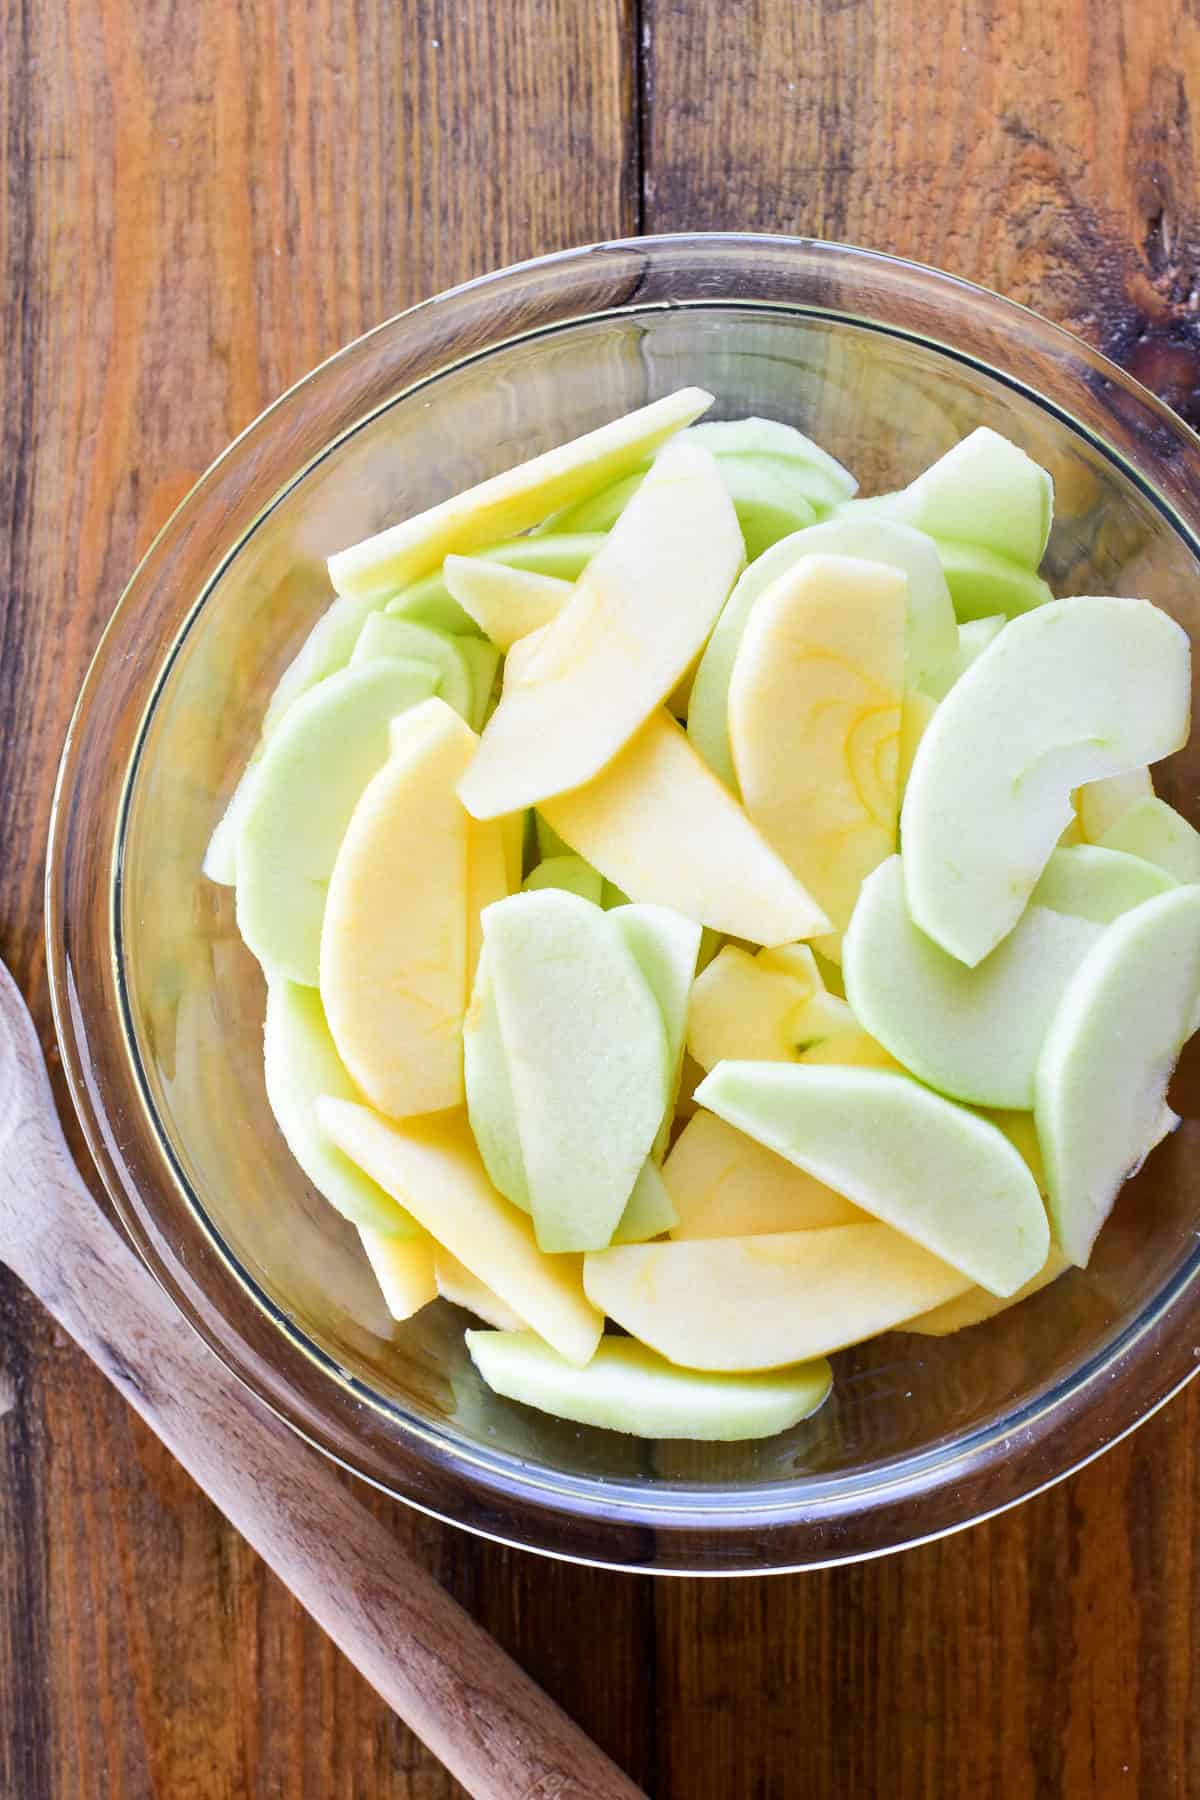 Sliced apples in a glass mixing bowl